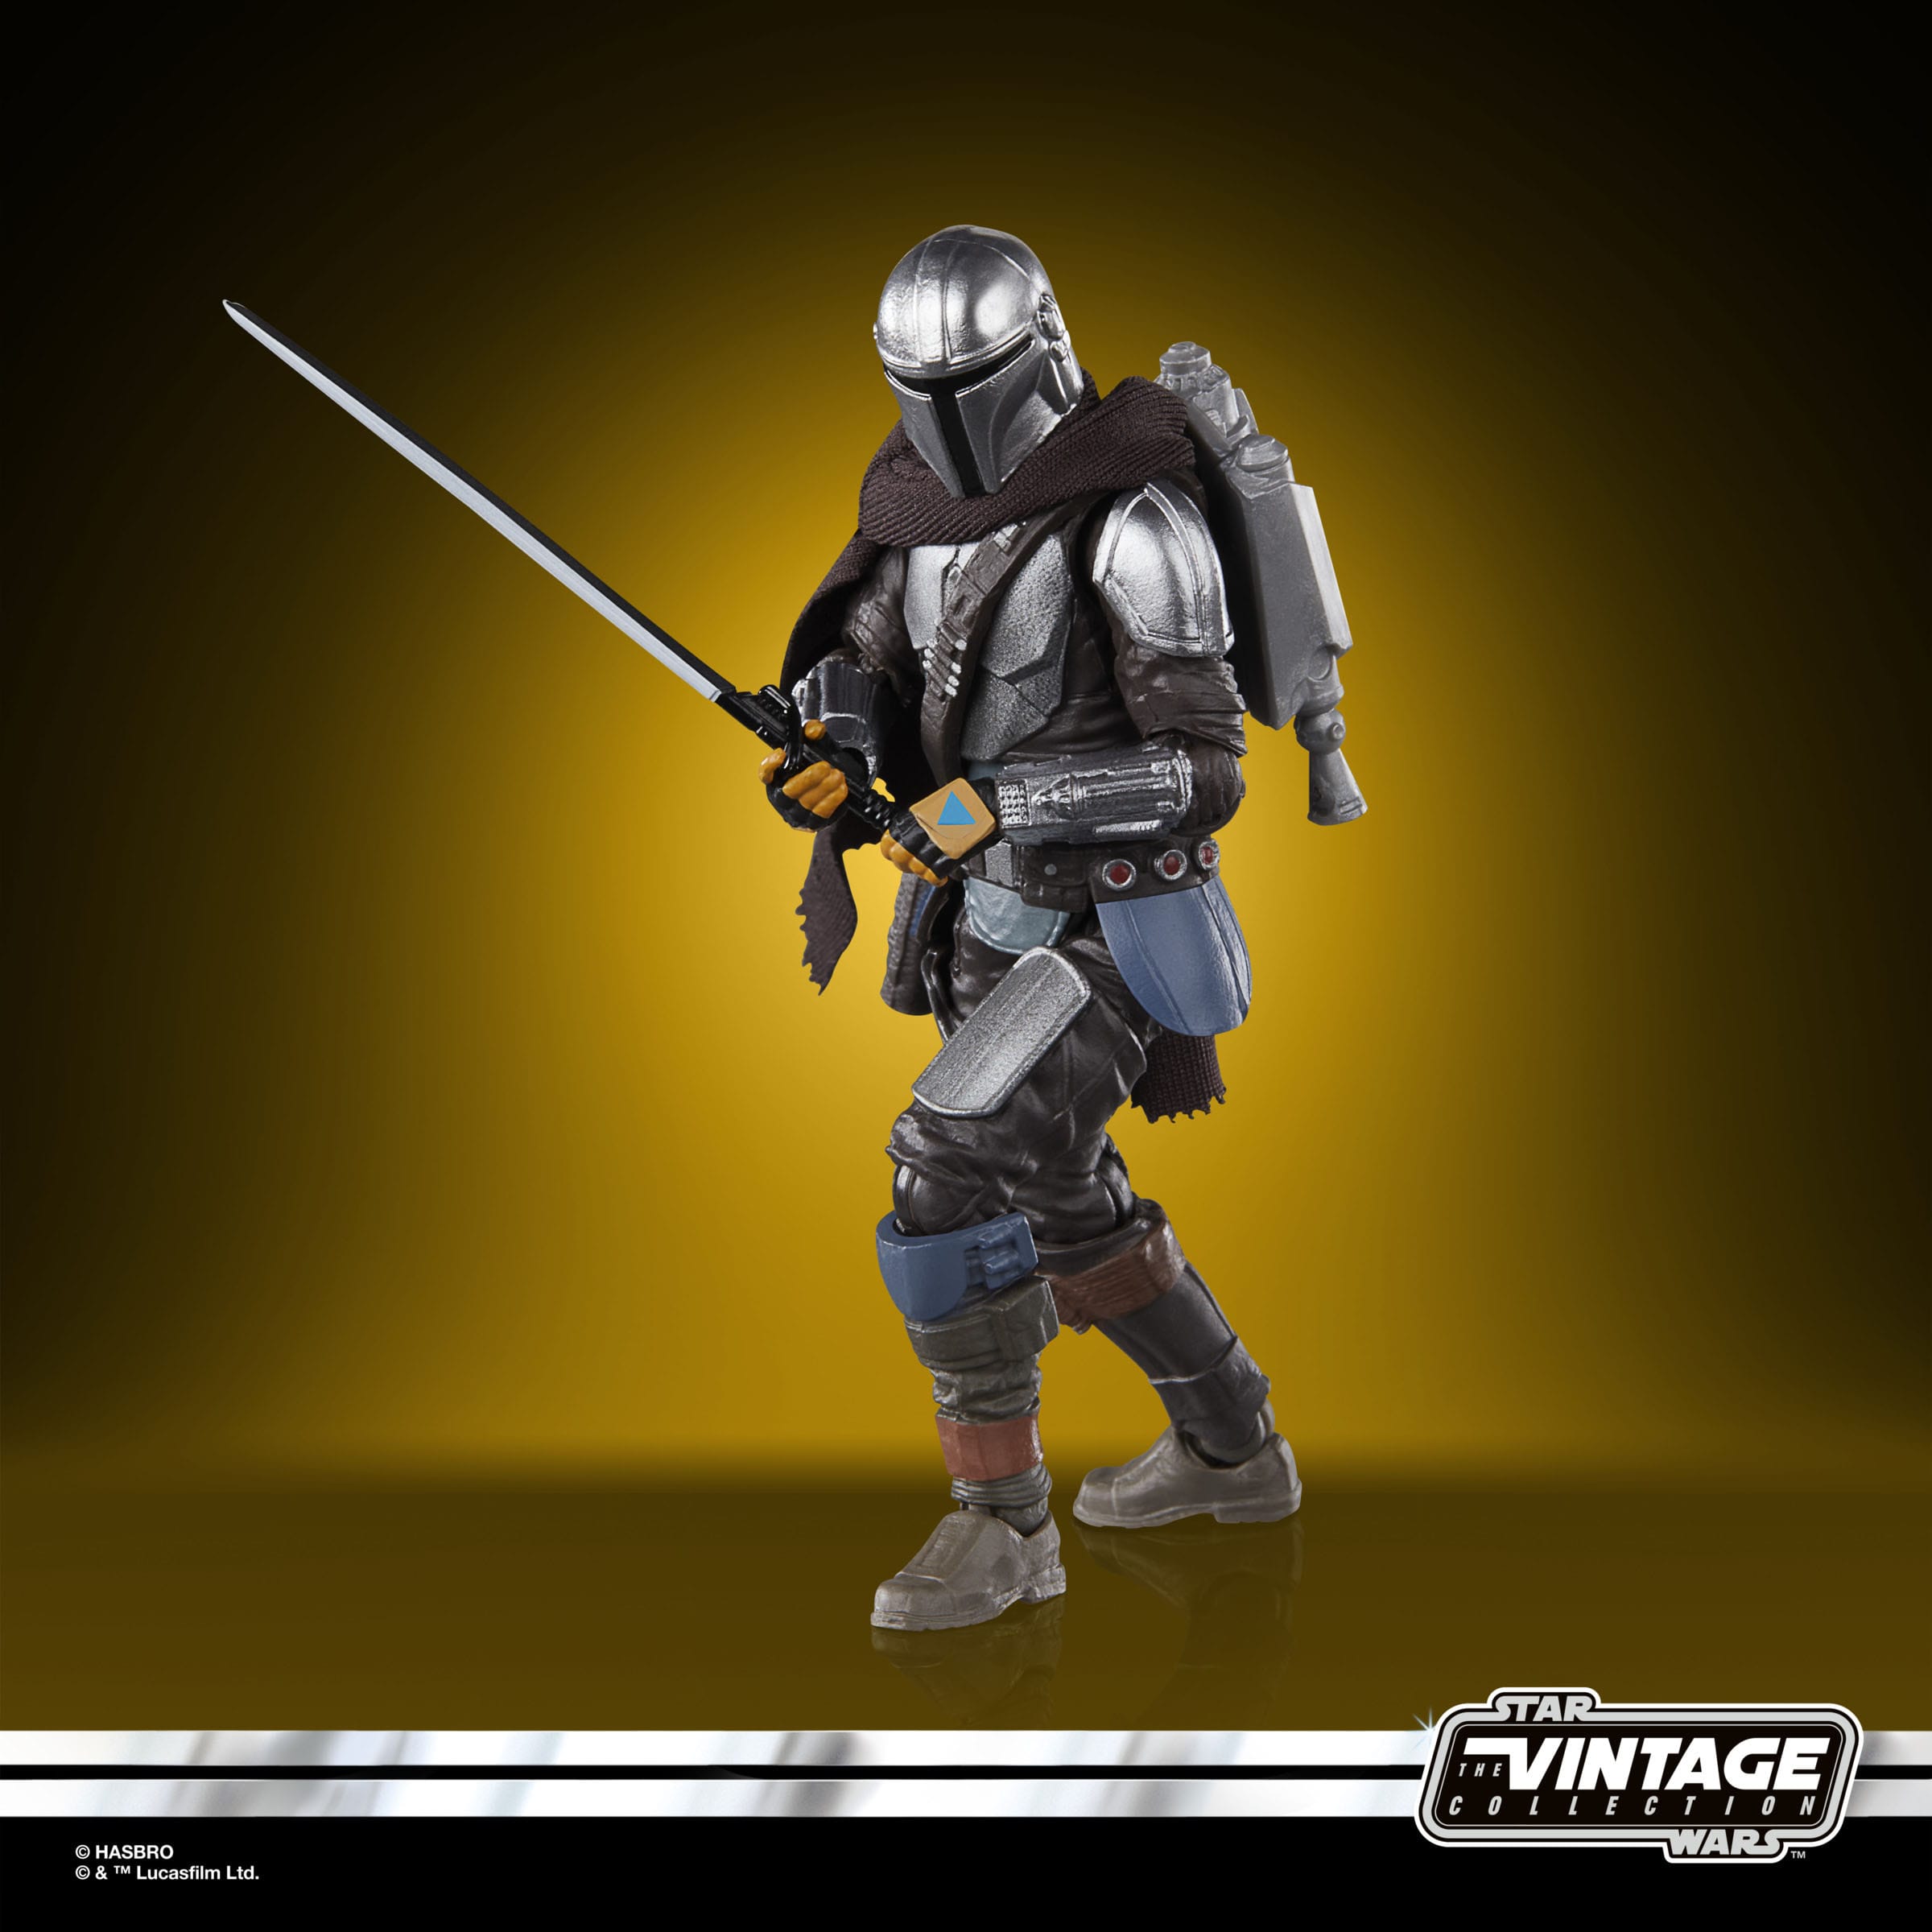 Star Wars: The Mandalorian Vintage Collection Actionfigur The Mandalorian (Mines of Mandalore) 10 cm HASF9780 5010996203298